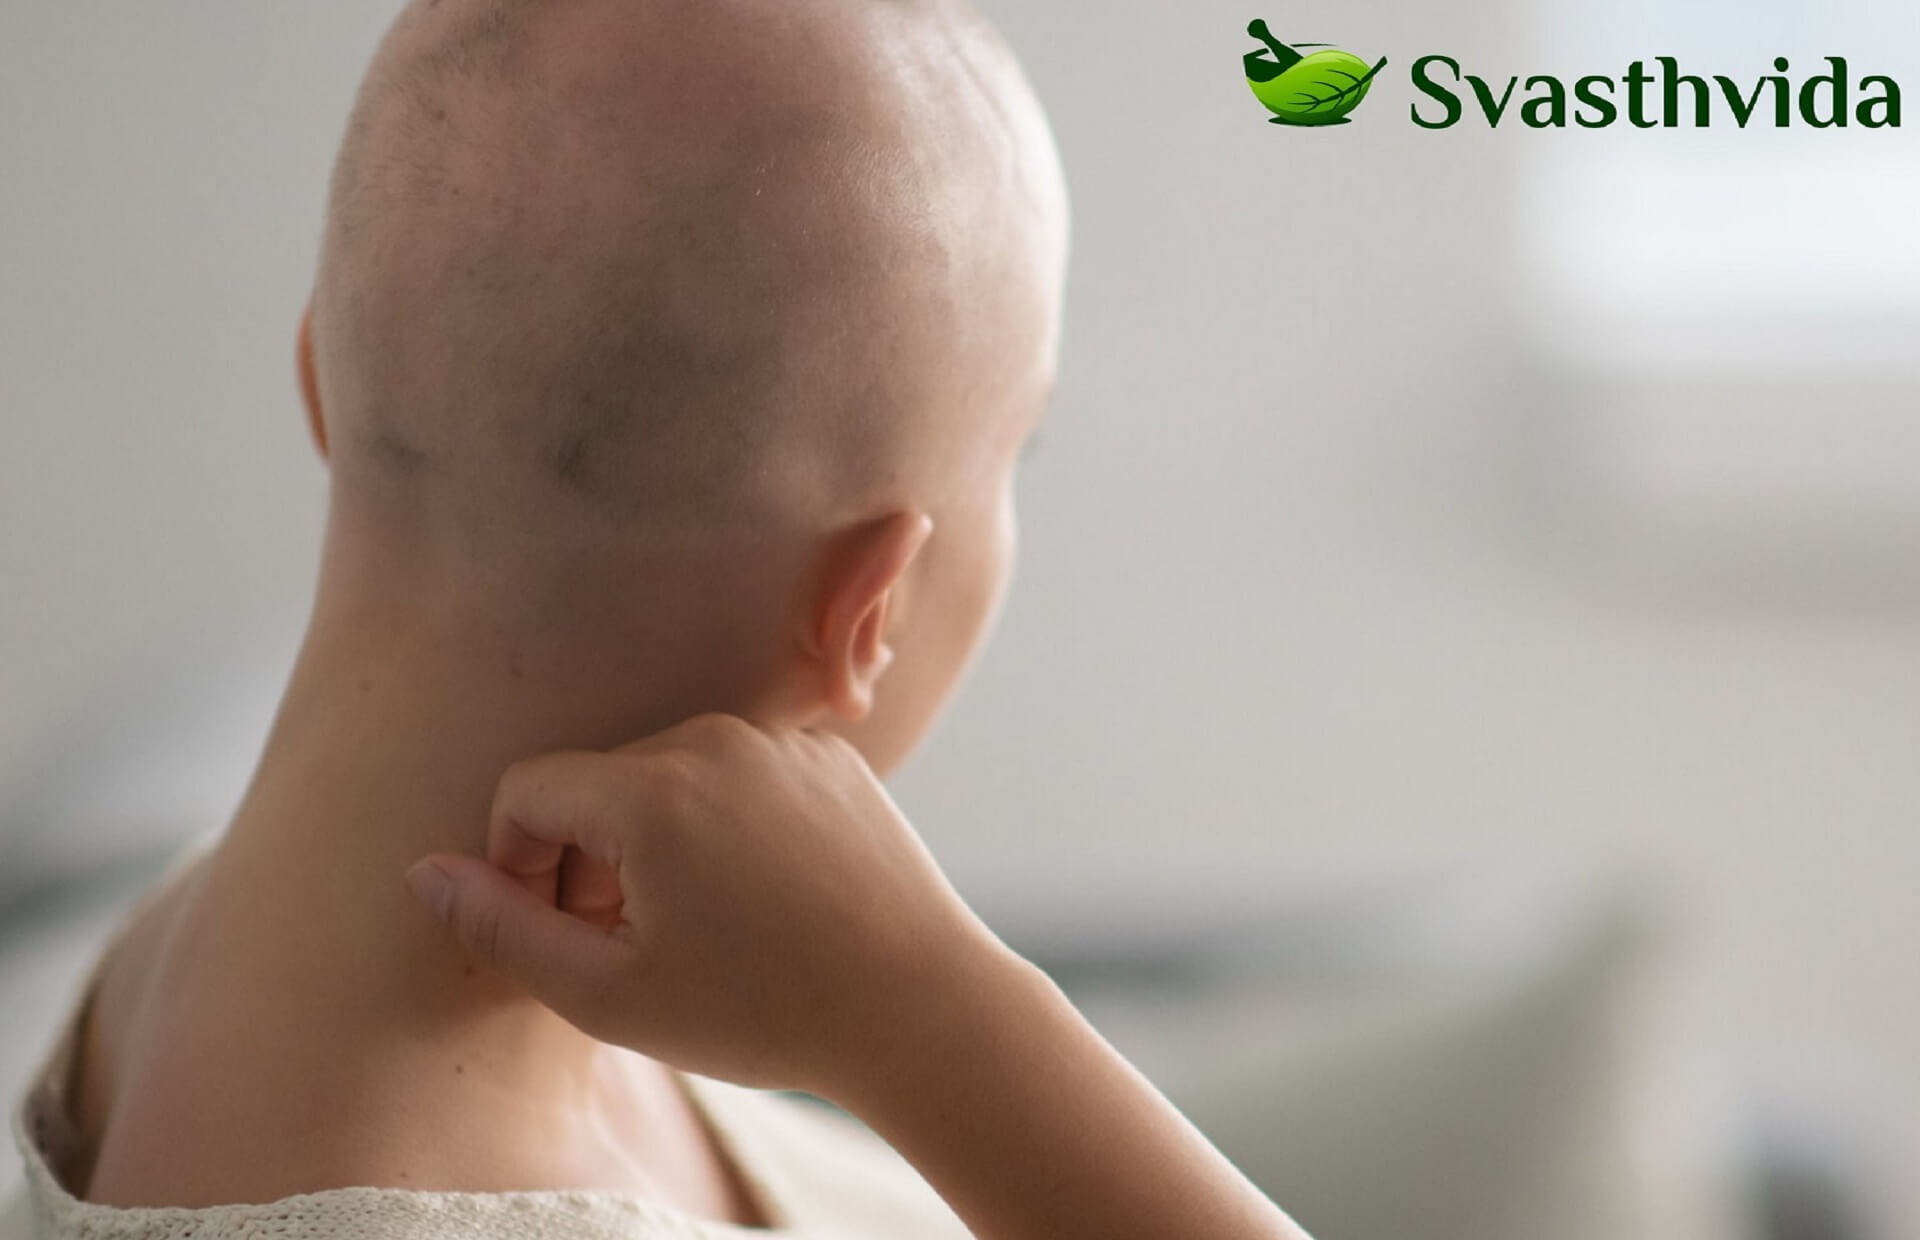 Ayurvedic Treatment For Cancer